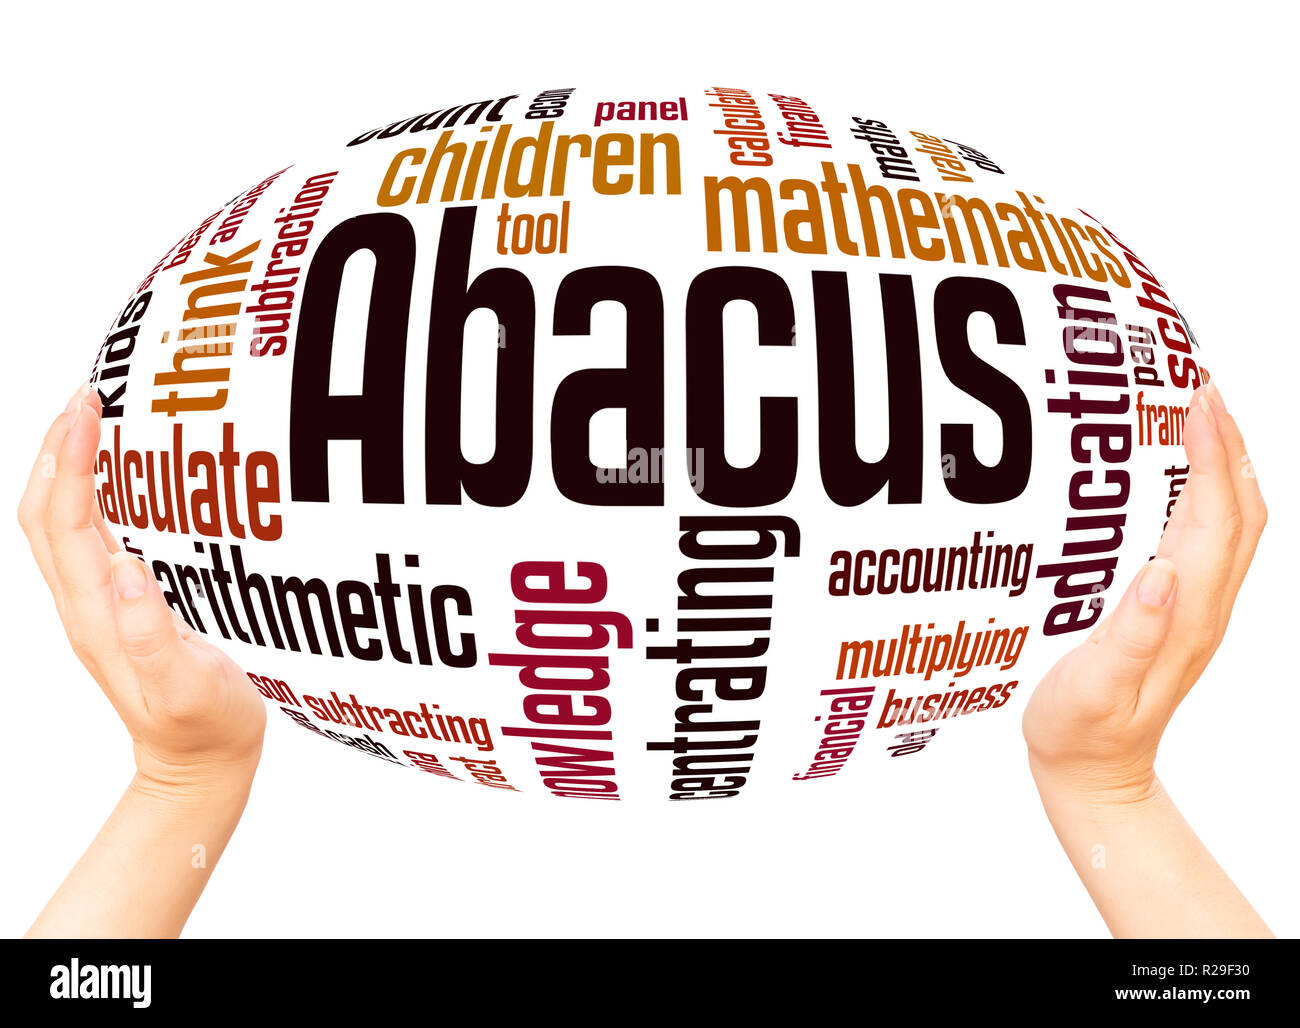 Abacus - counting frame, word cloud hand sphere concept on white background. Stock Photo